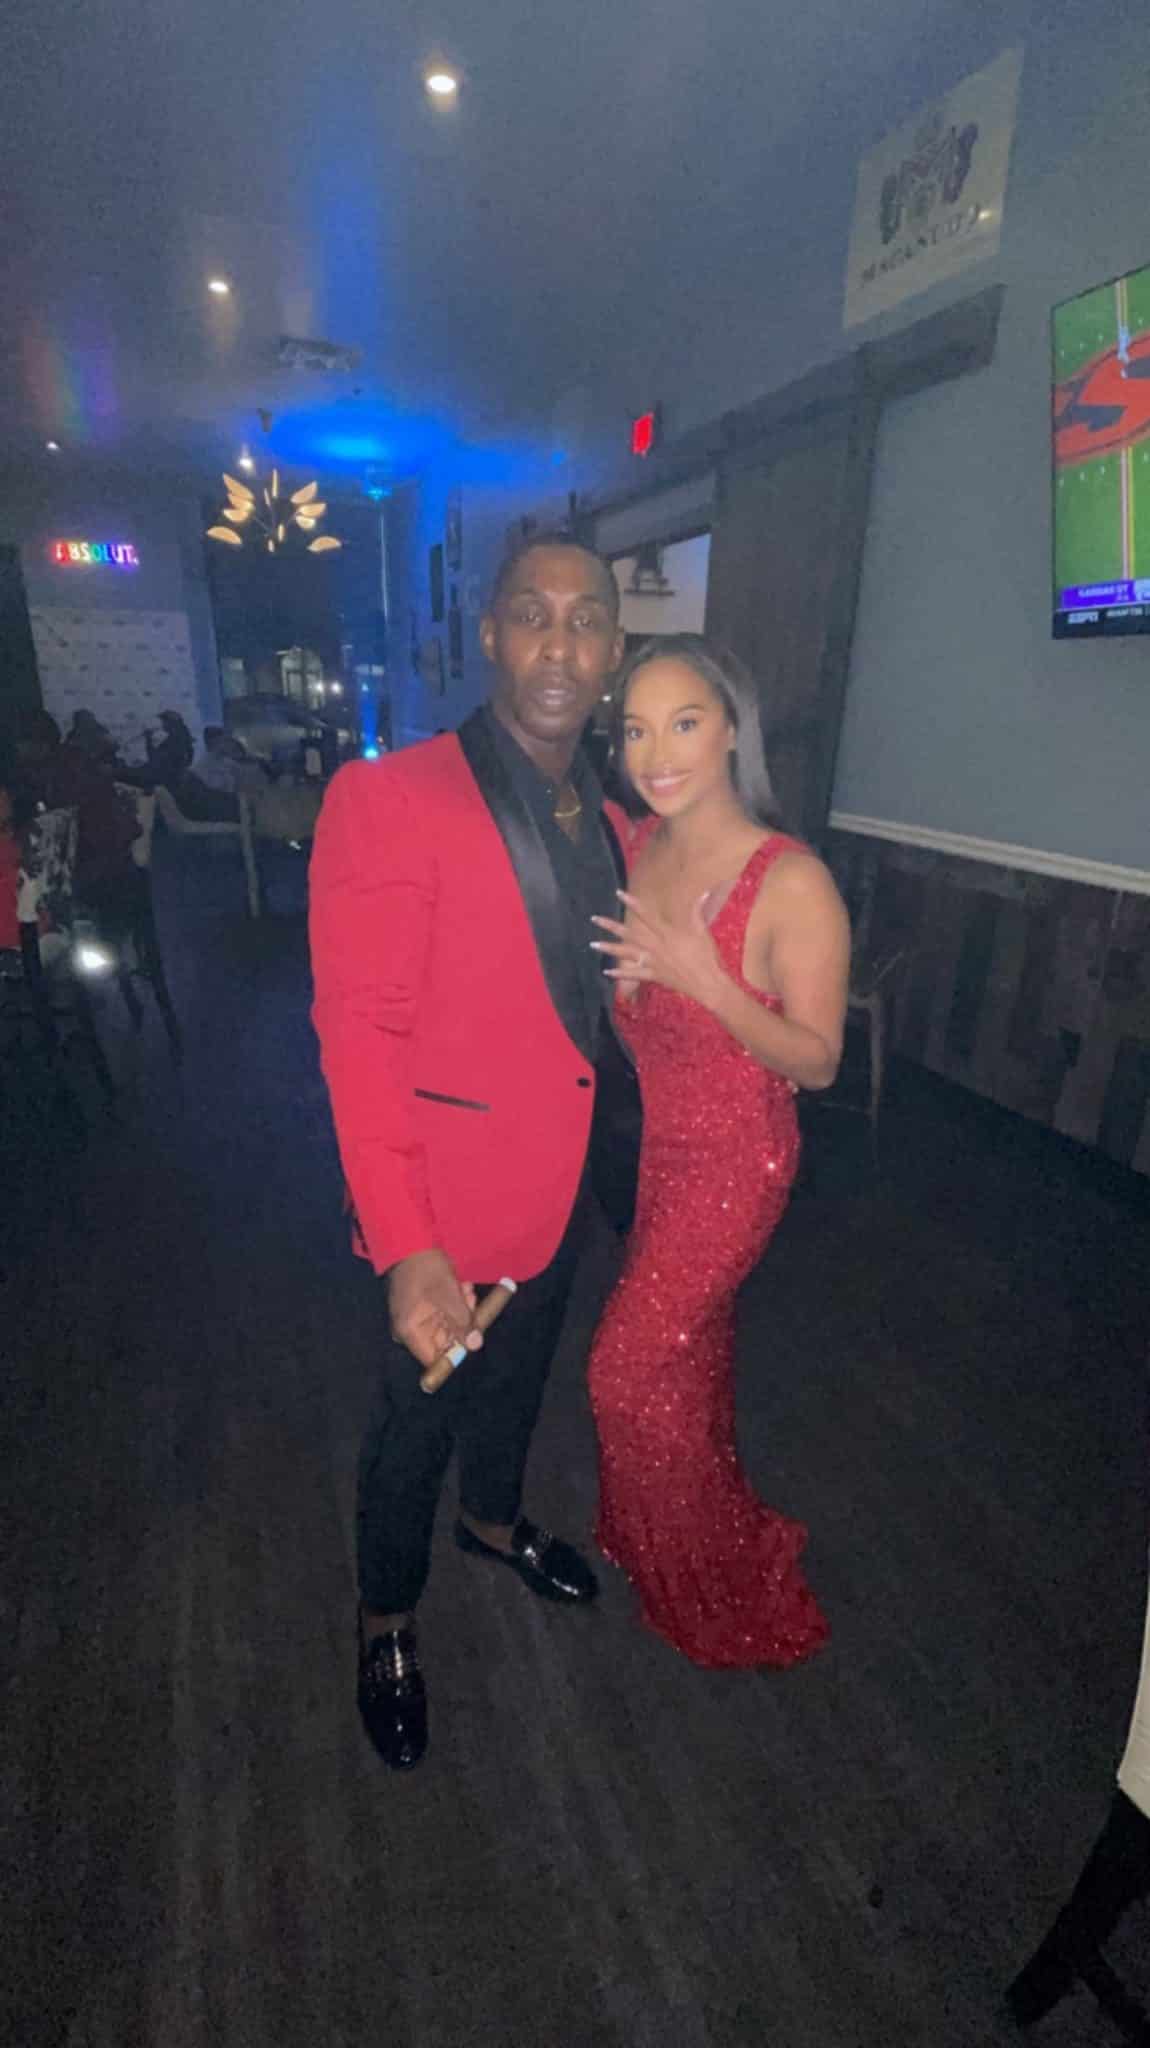 man and woman wearing matching red formal attire pose together for picture